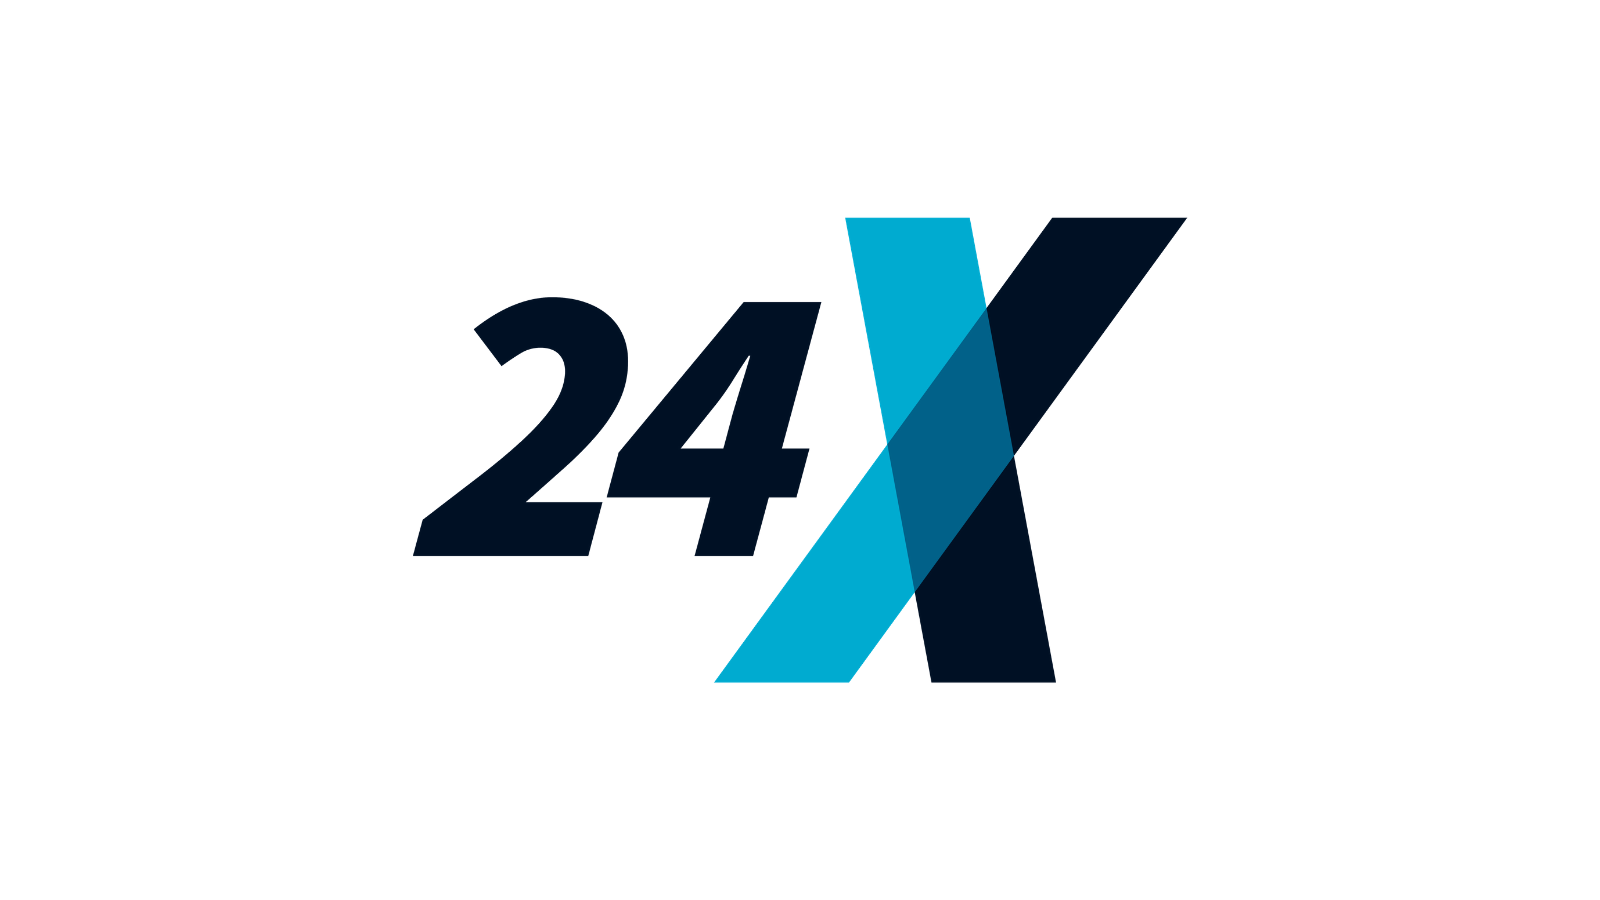 24 Exchange Raises $14M Investment Round Led by Point72 Ventures